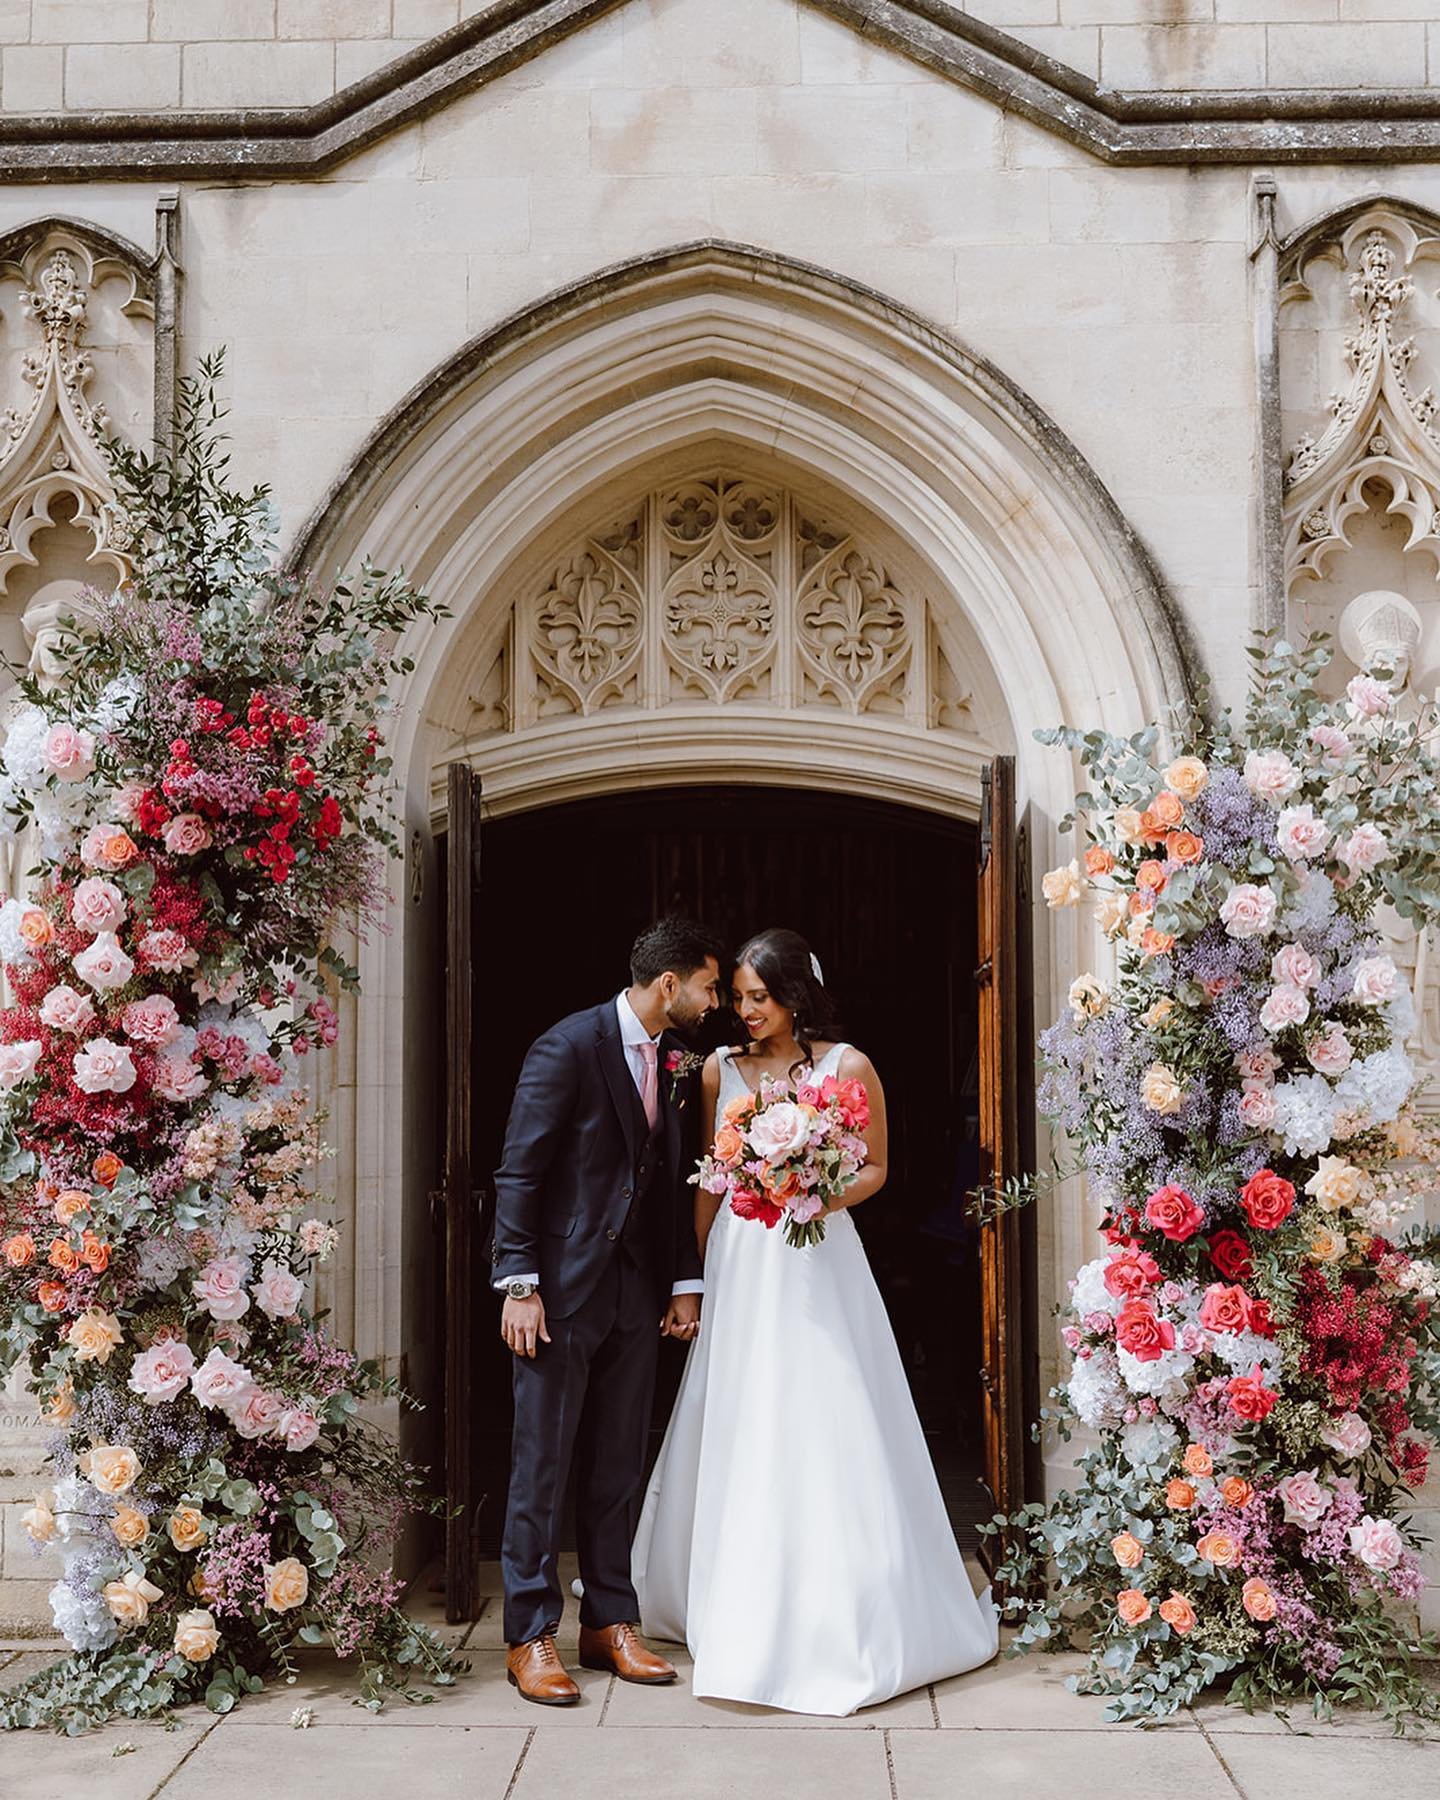 A spring floral explosion for Ru &amp; Sanchia&rsquo;s wedding day on Friday 🌸🤍🌼 What a beautiful day celebrating with these two at @offleyplace and working with such a fab team 👌🏼Here are just a few favourite frames&hellip; 

Photography: @jess